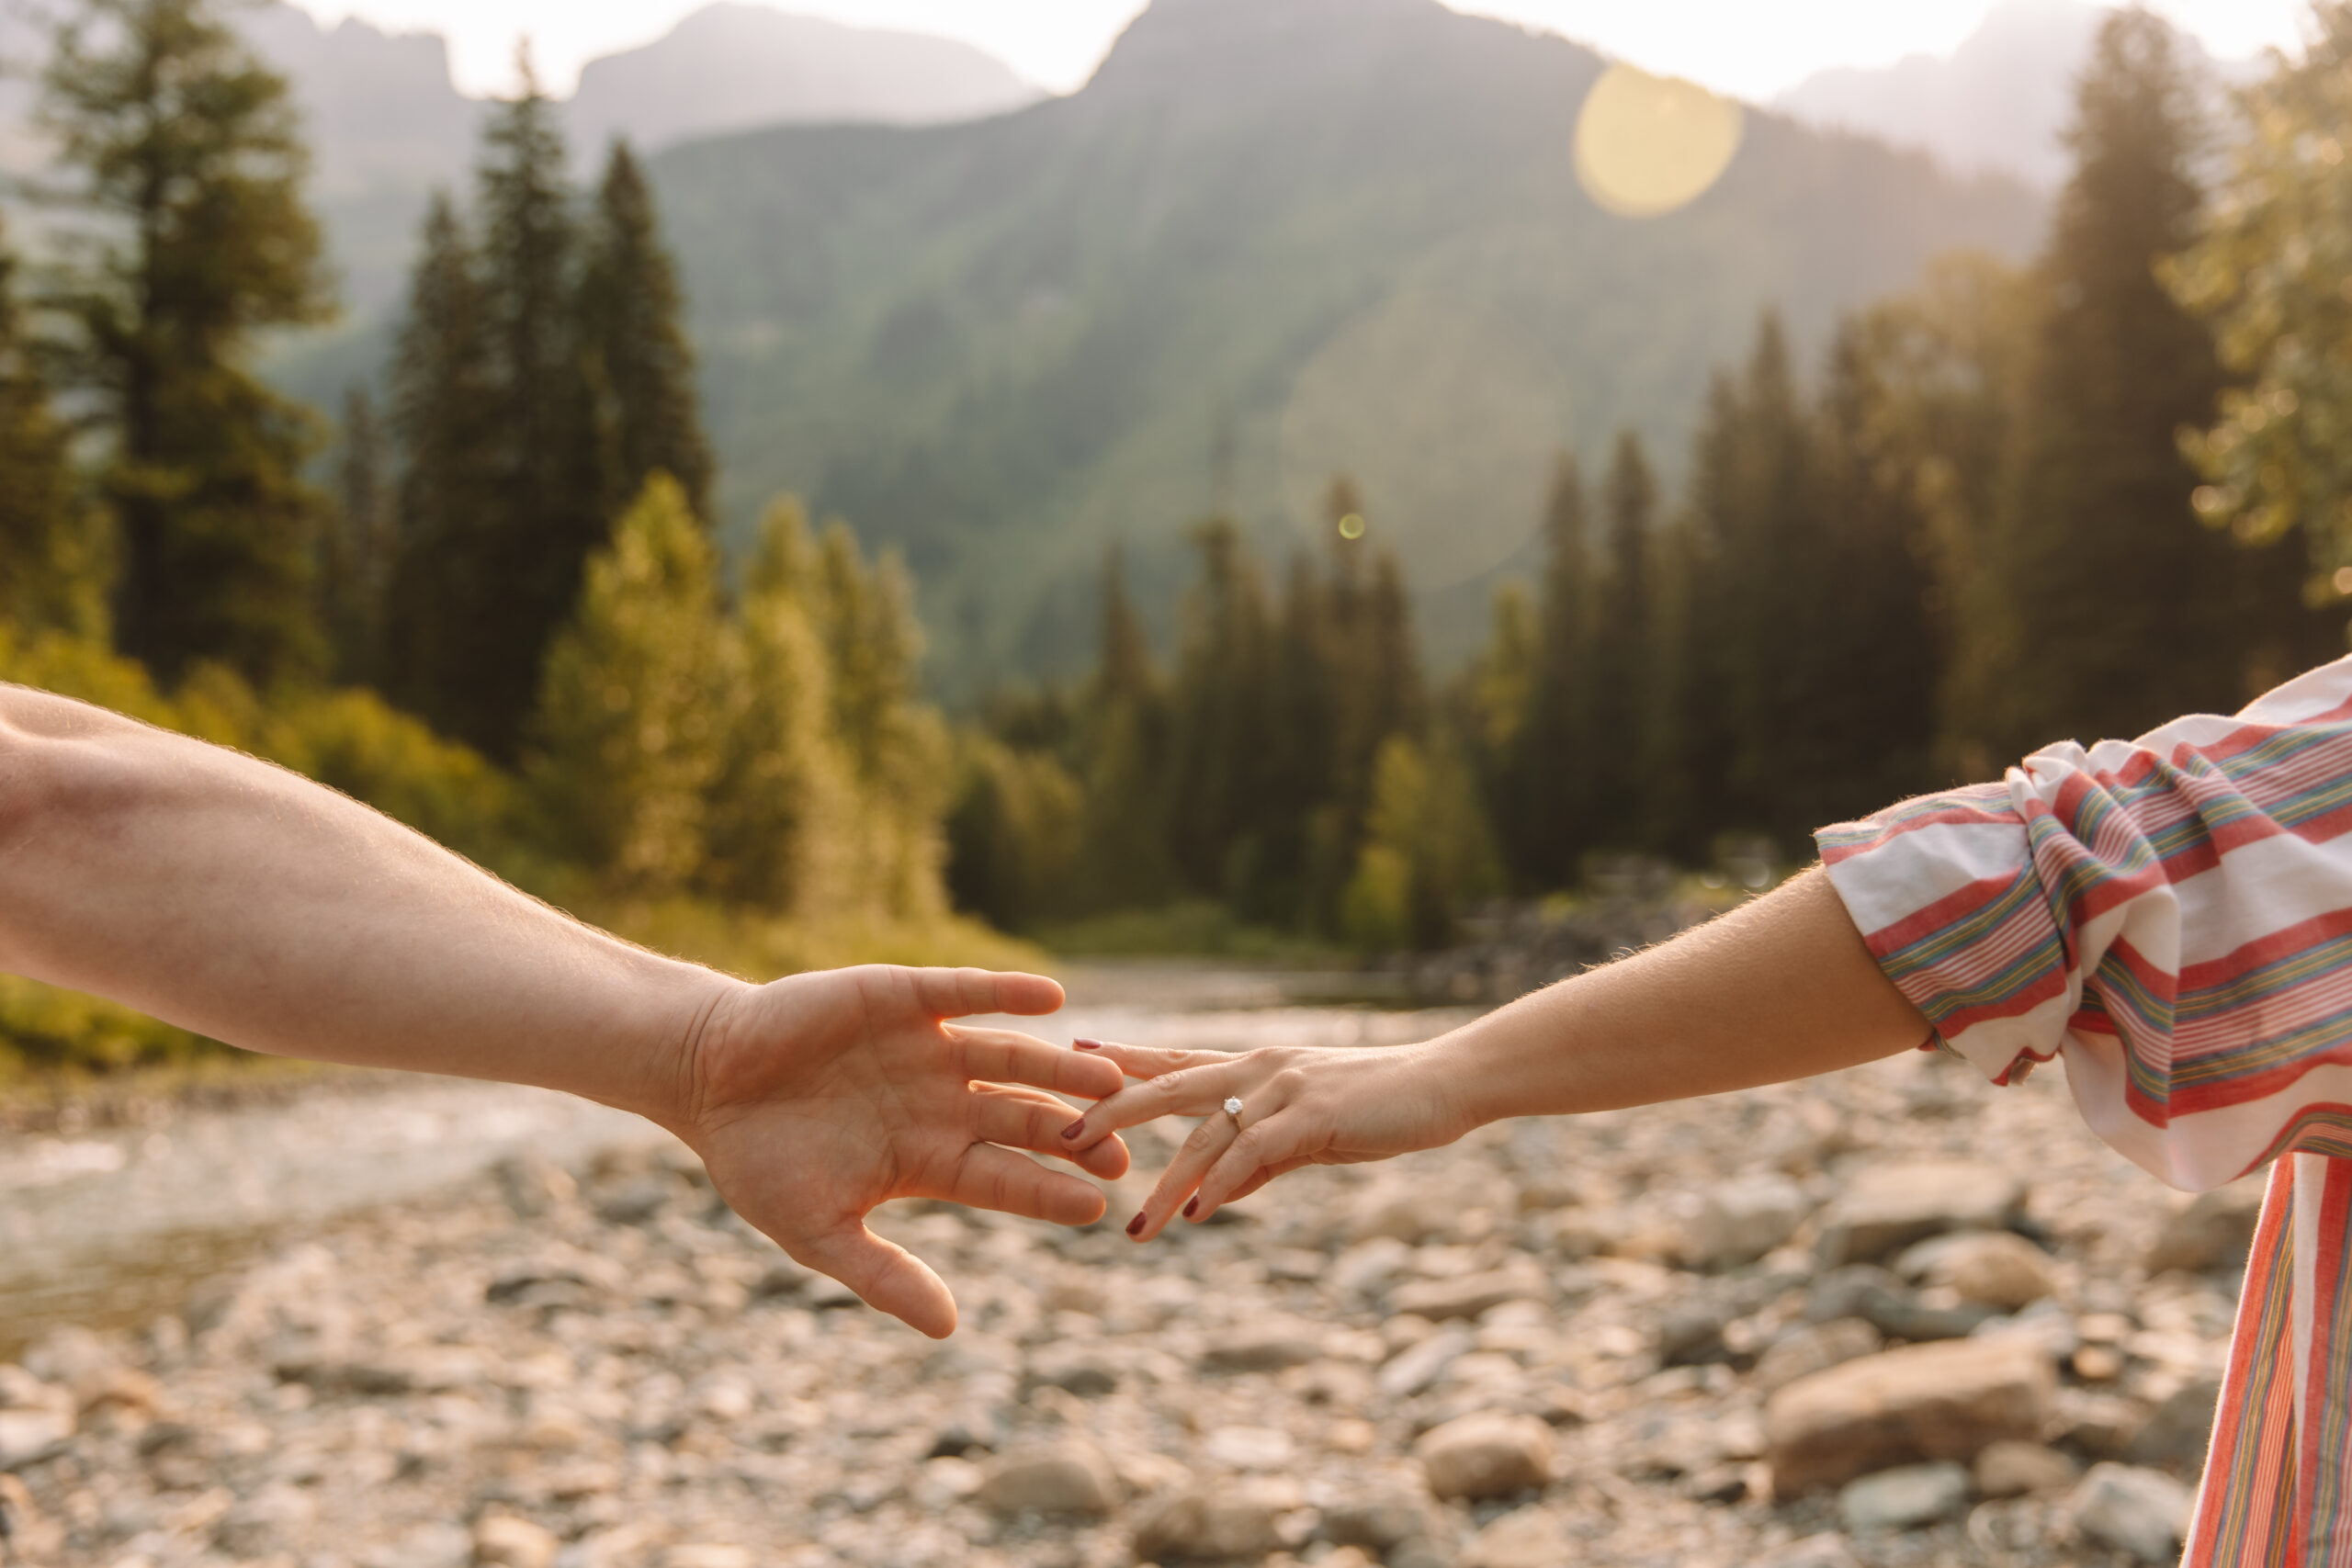 Newly engaged couple reaching out their hands to each other with the mountains in the background